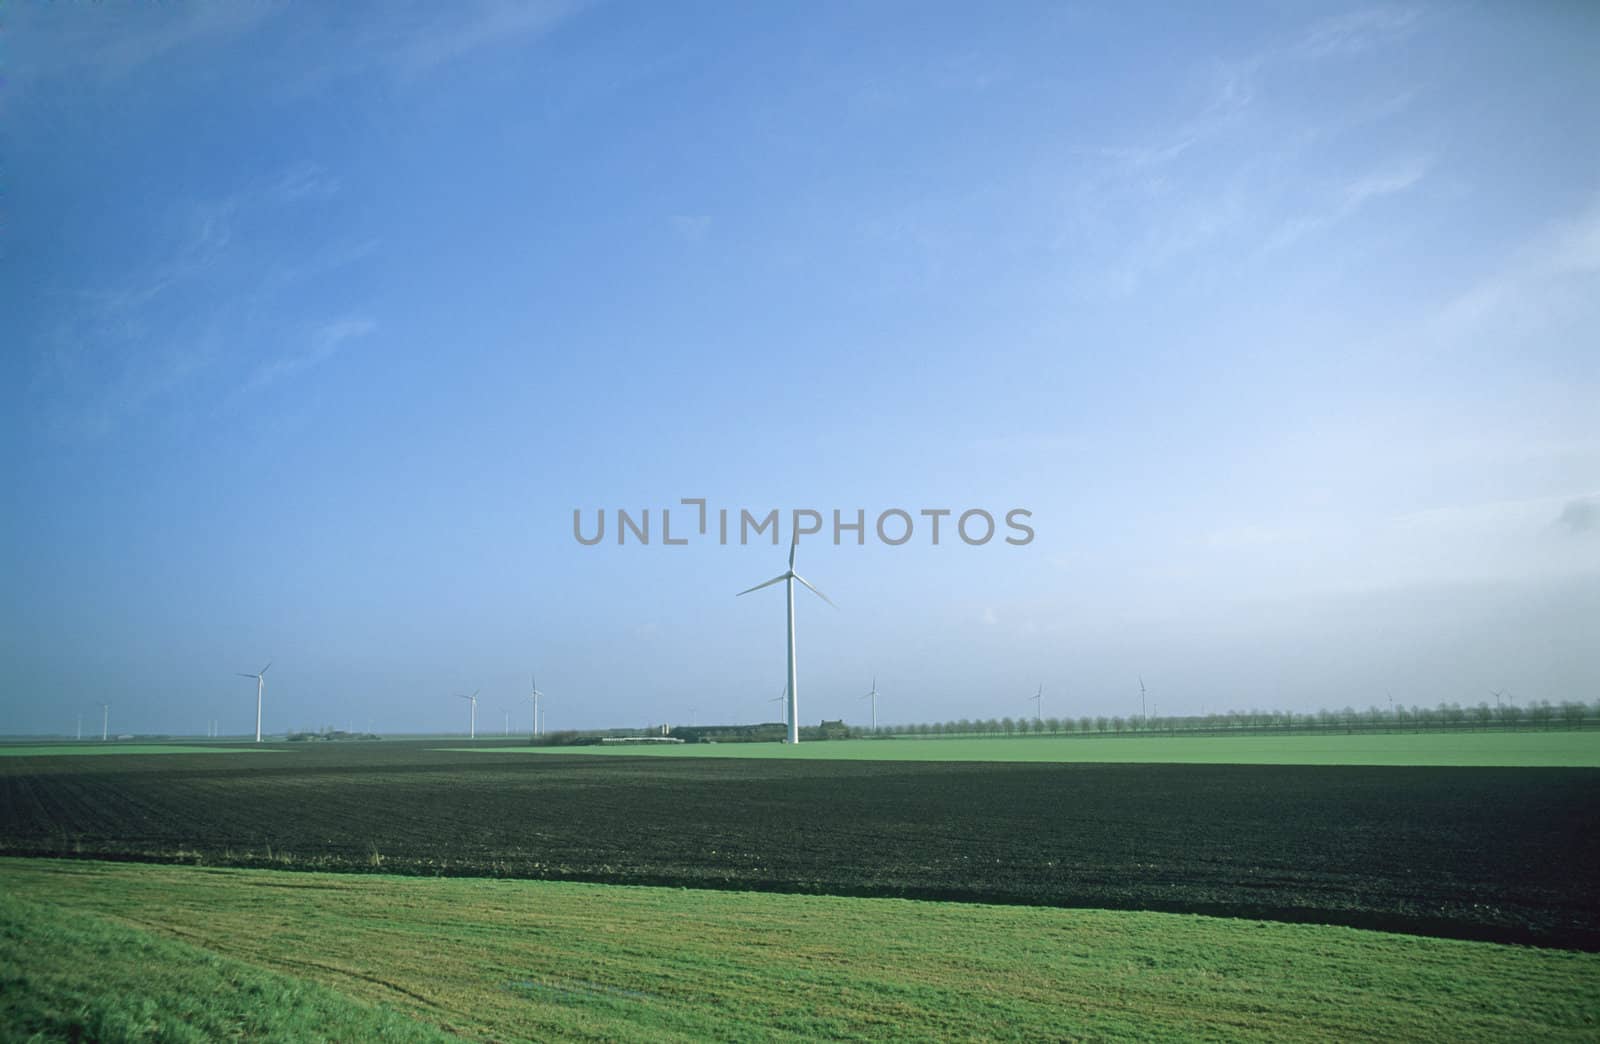 Large modern windmills on a farm in the Netherlands.